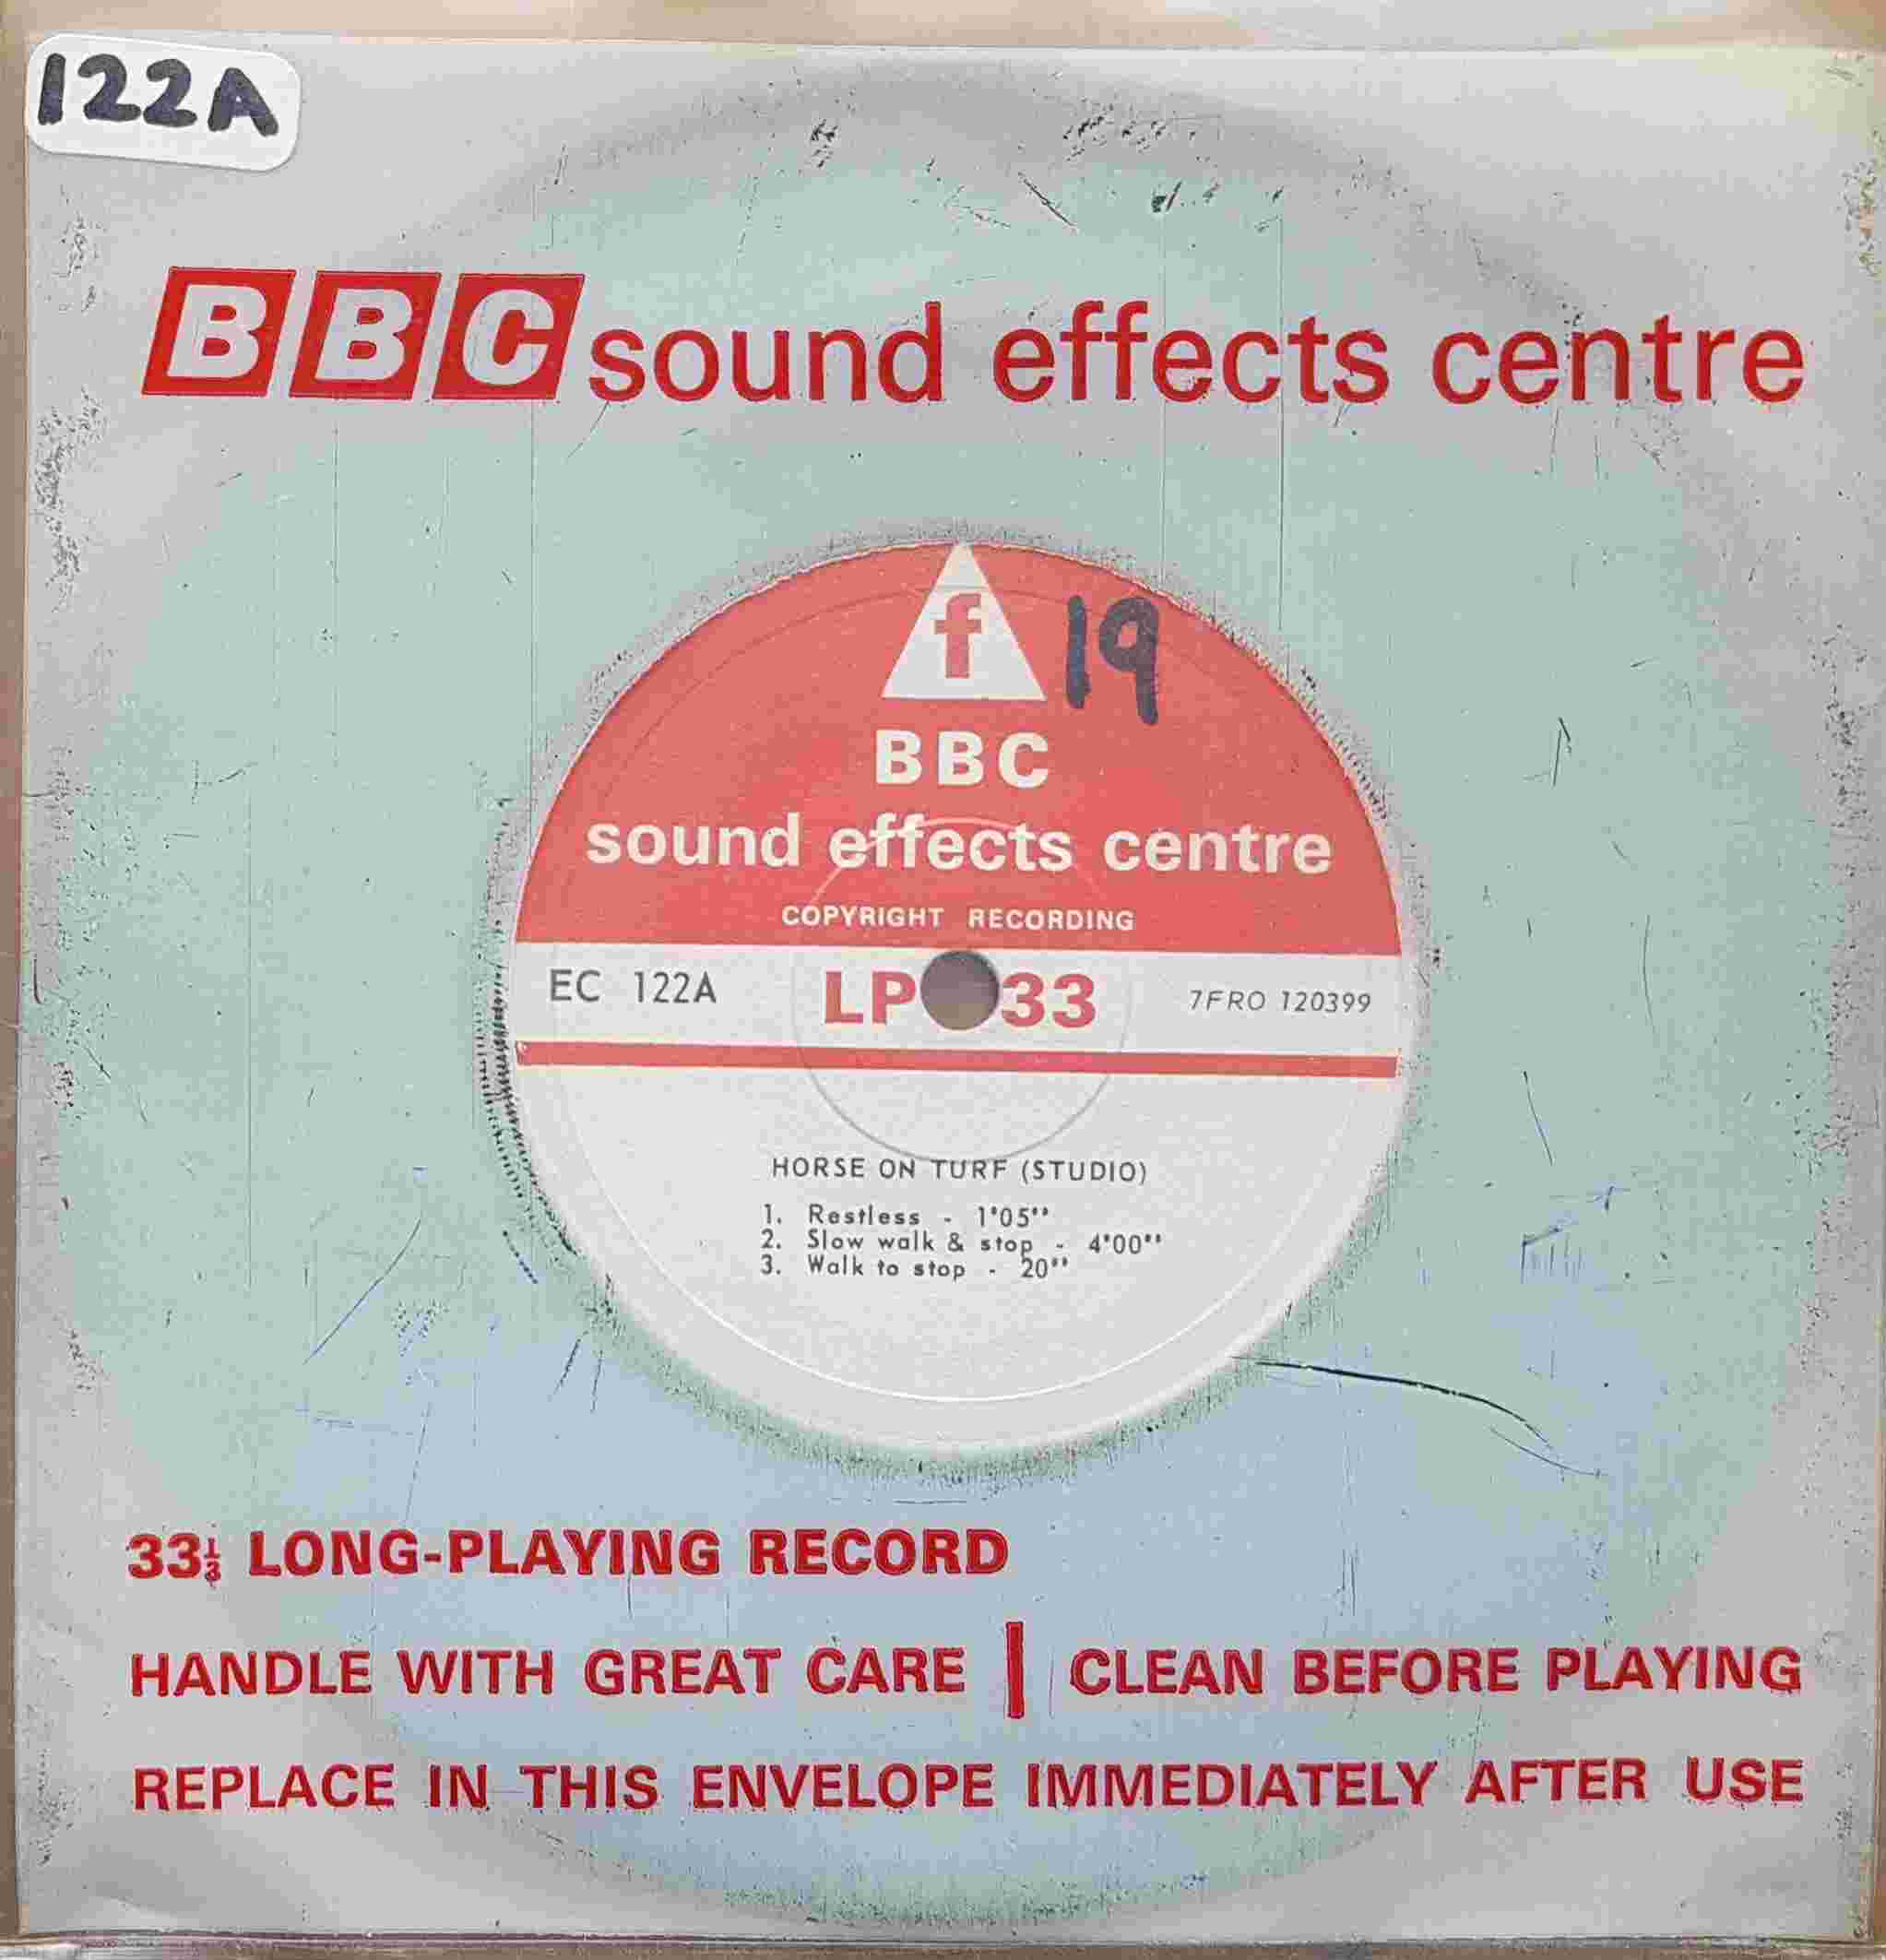 Picture of EC 122A Horse on turf (Studio) by artist Not registered from the BBC singles - Records and Tapes library